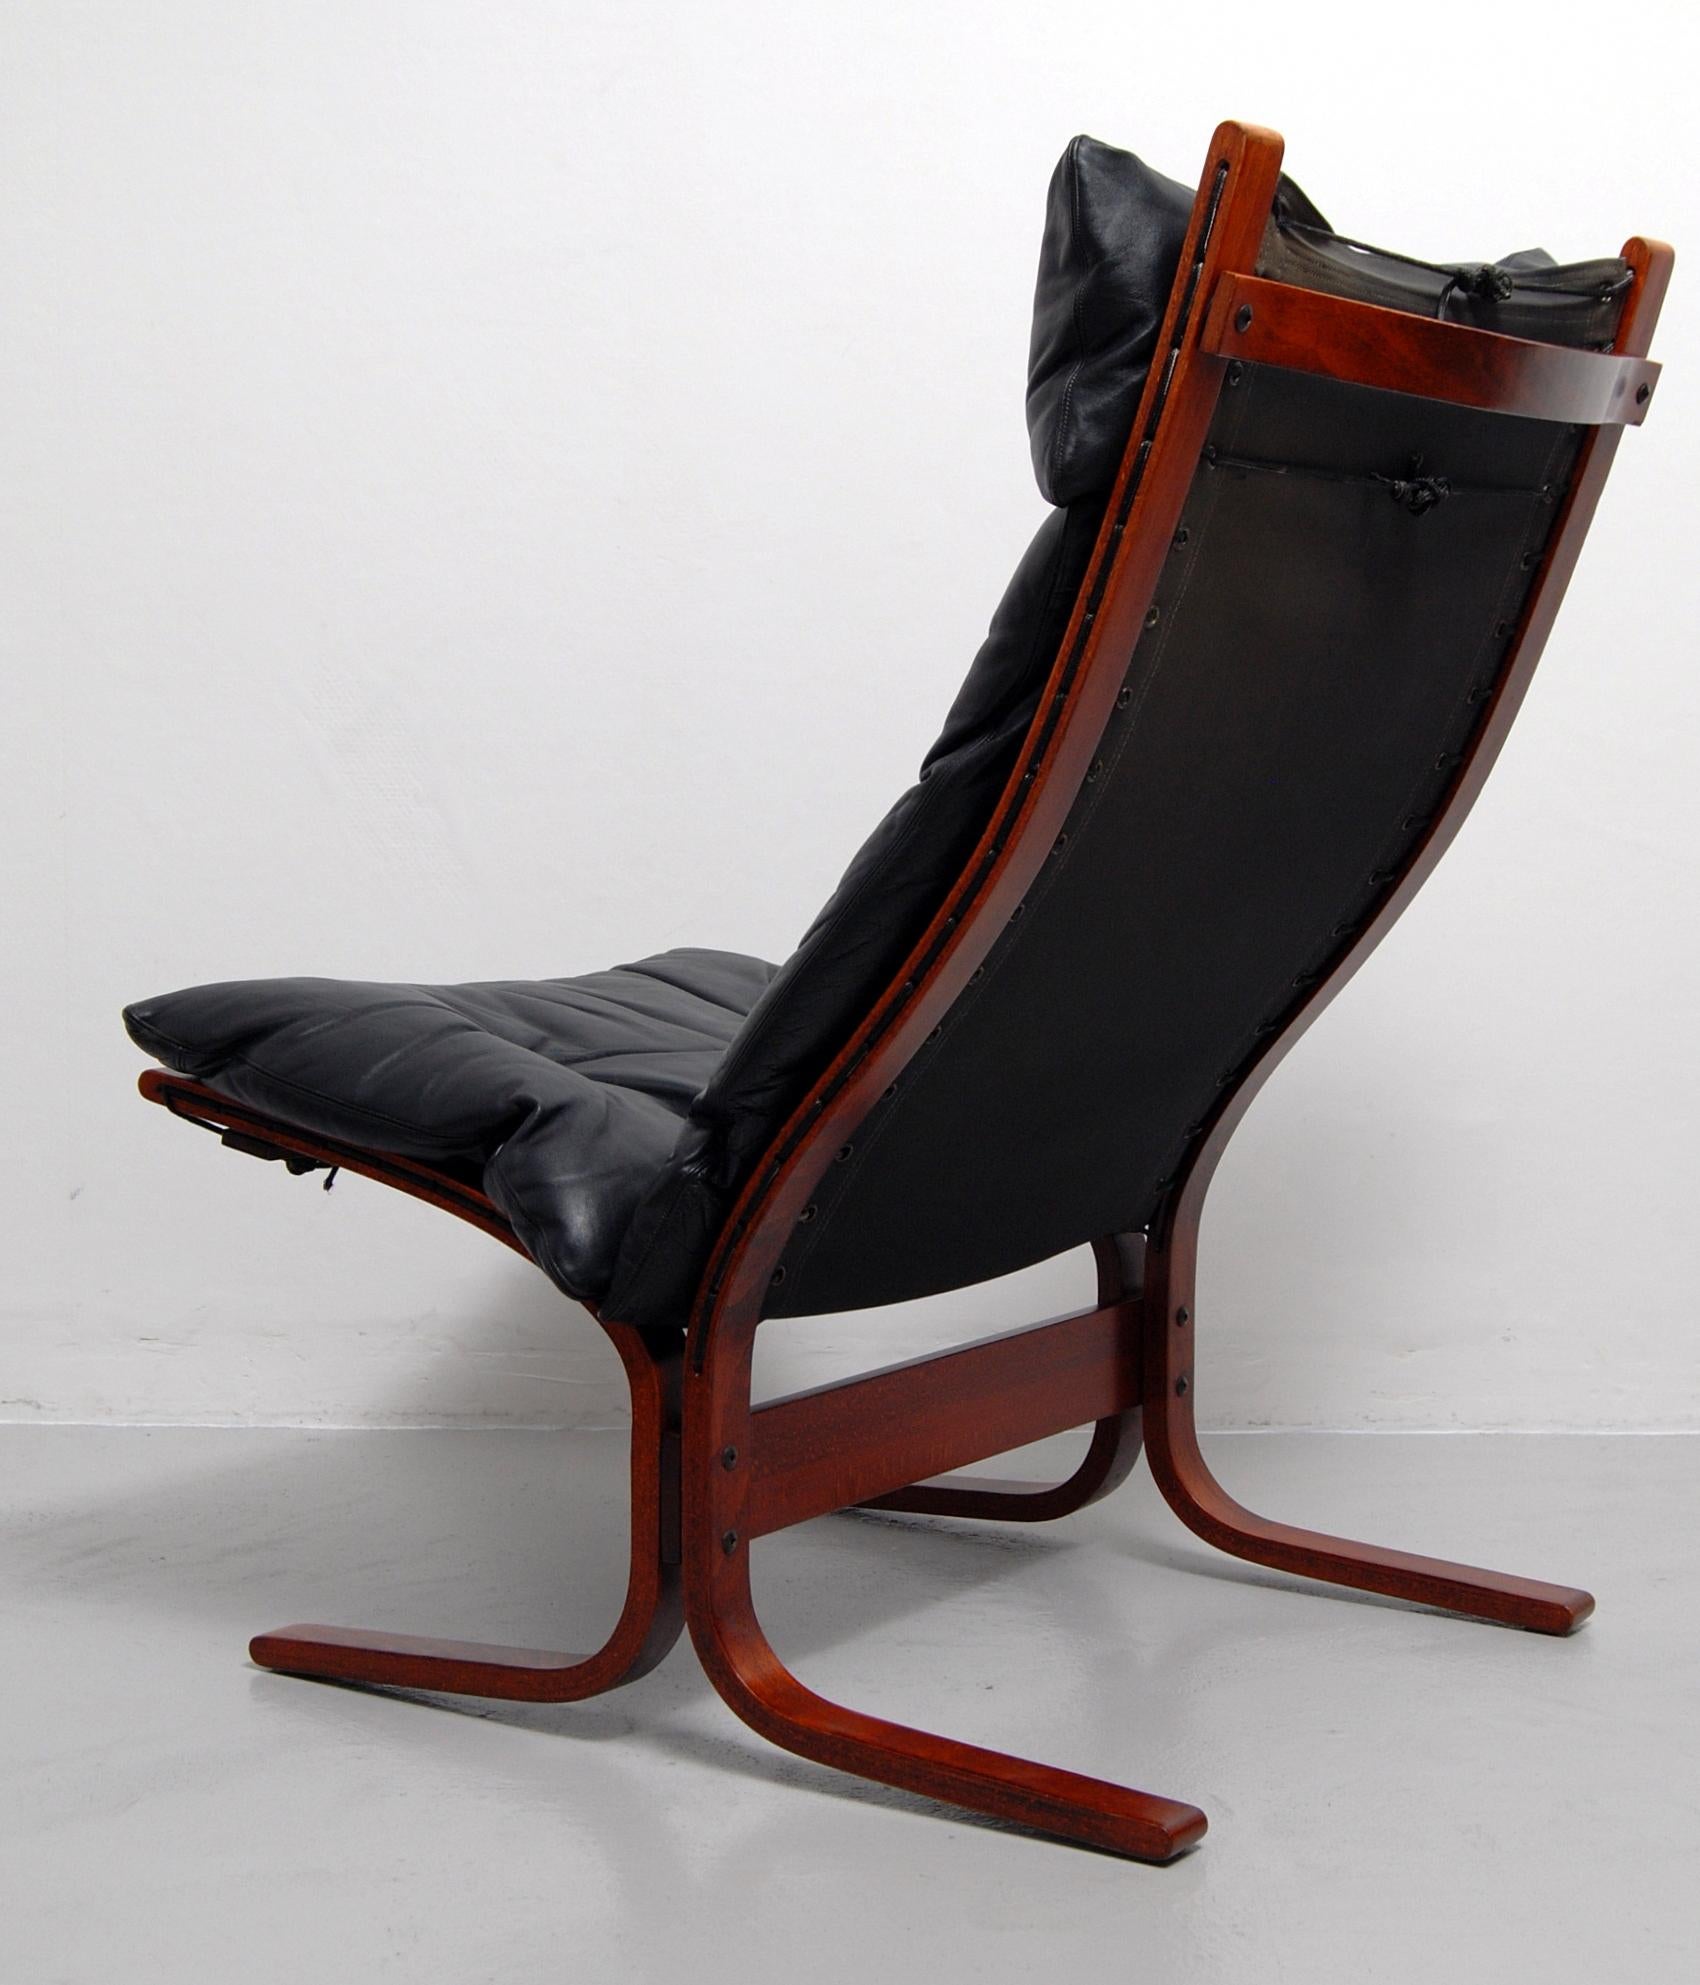 Westnofa Siesta High Back Sling Lounge Chair and Ottoman by Ingmar Relling (Mitte des 20. Jahrhunderts)